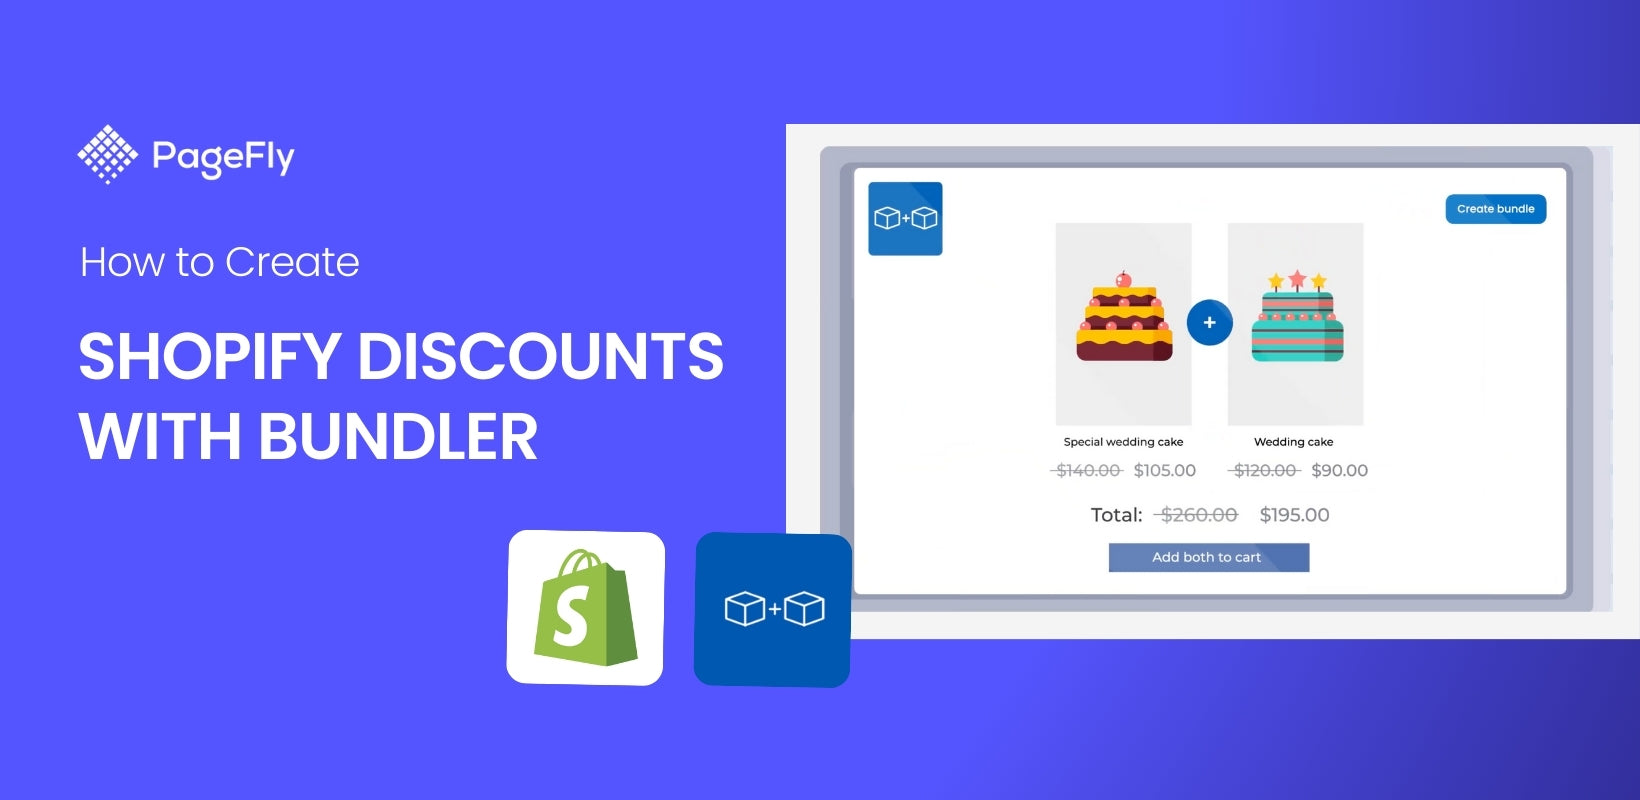 How to Create Effective Shopify Discounts with Bundler